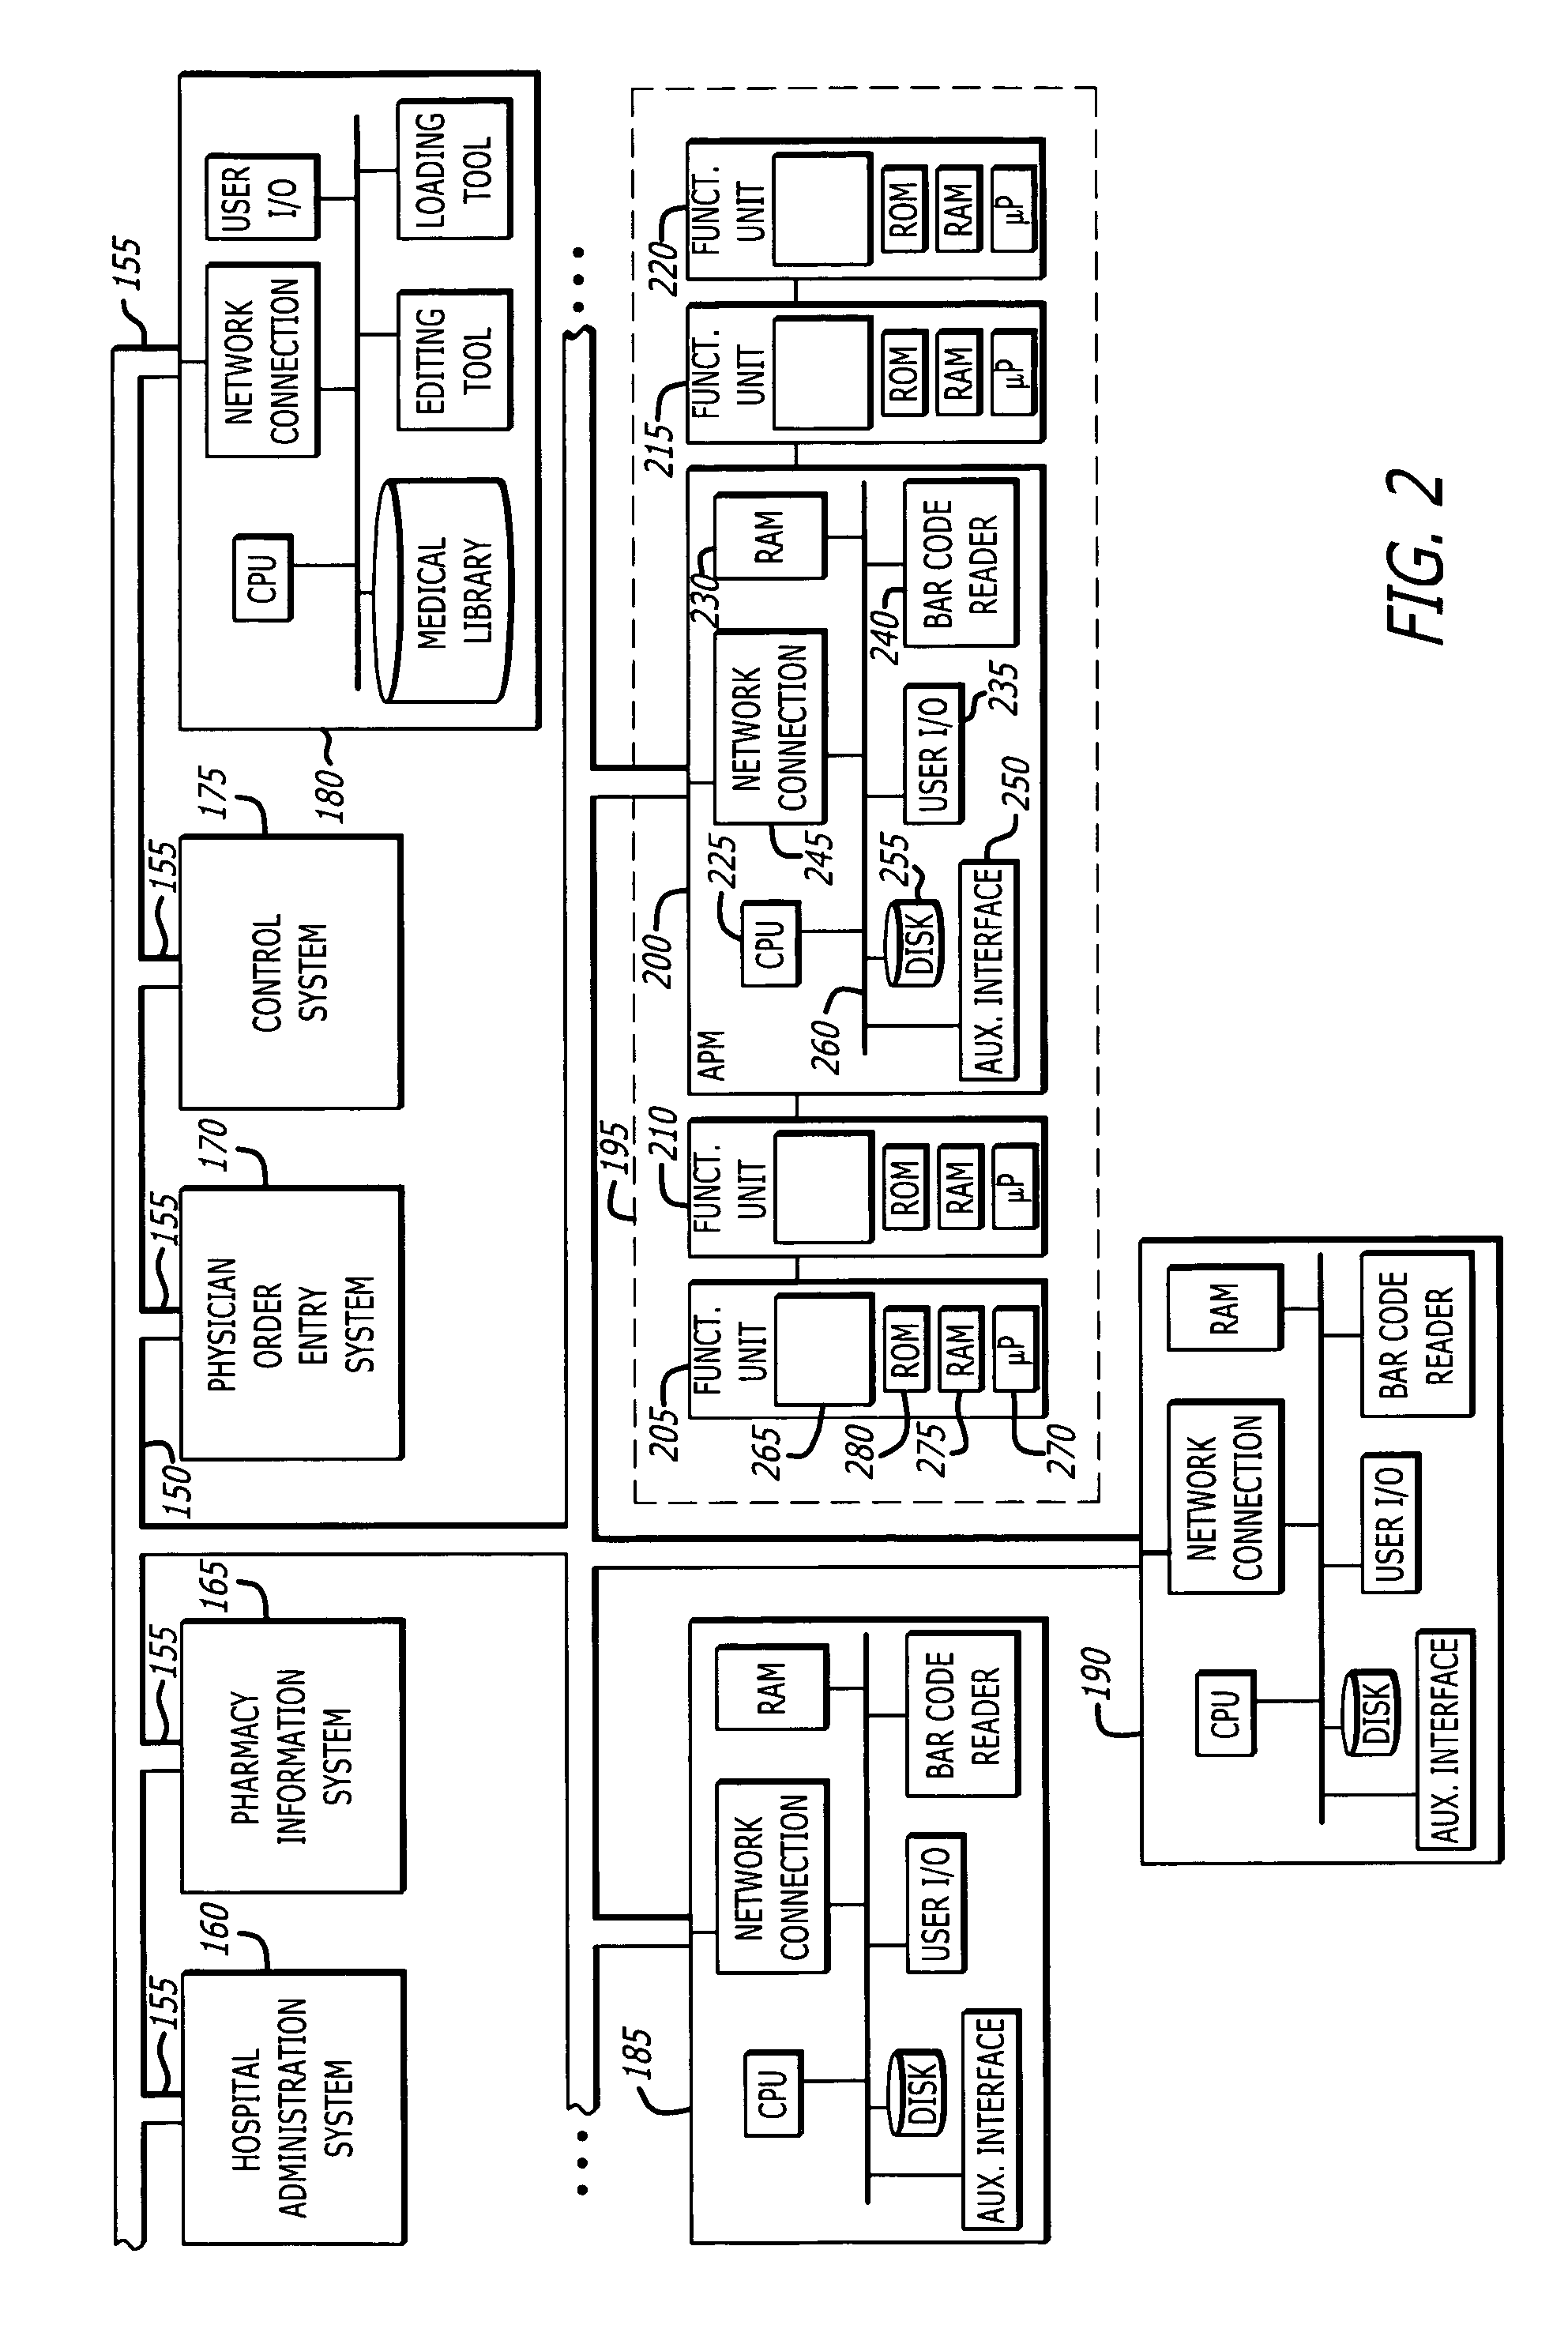 System and method for dynamically adjusting patient therapy